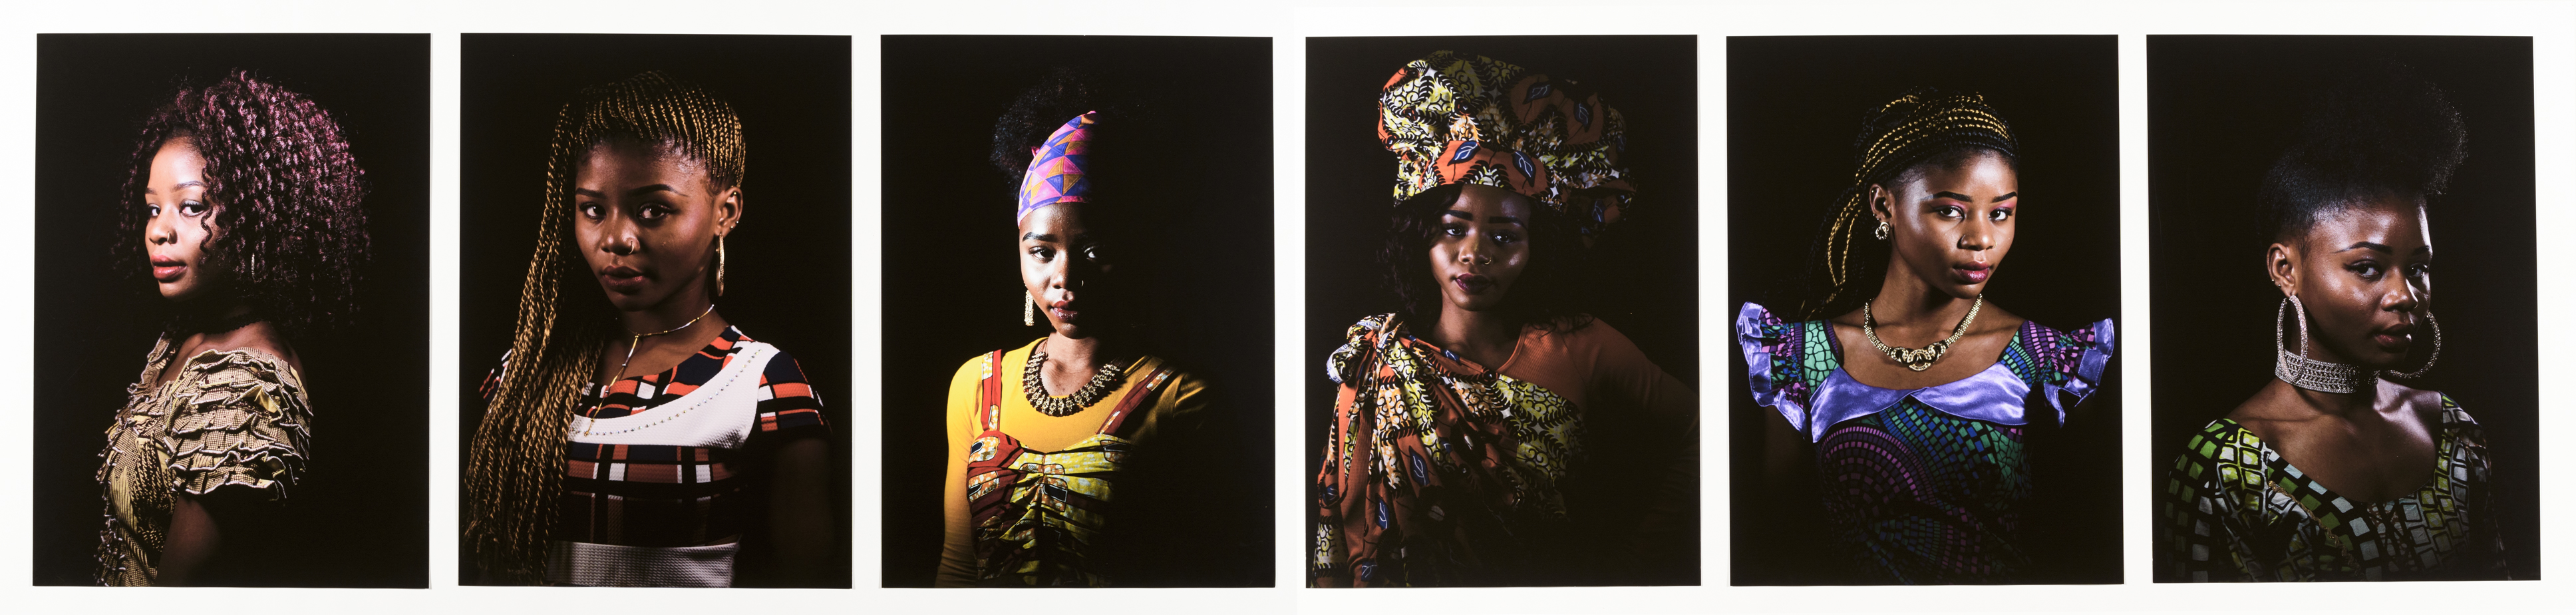 Six photographic portraits of Arfican women with elaborately styled hair.